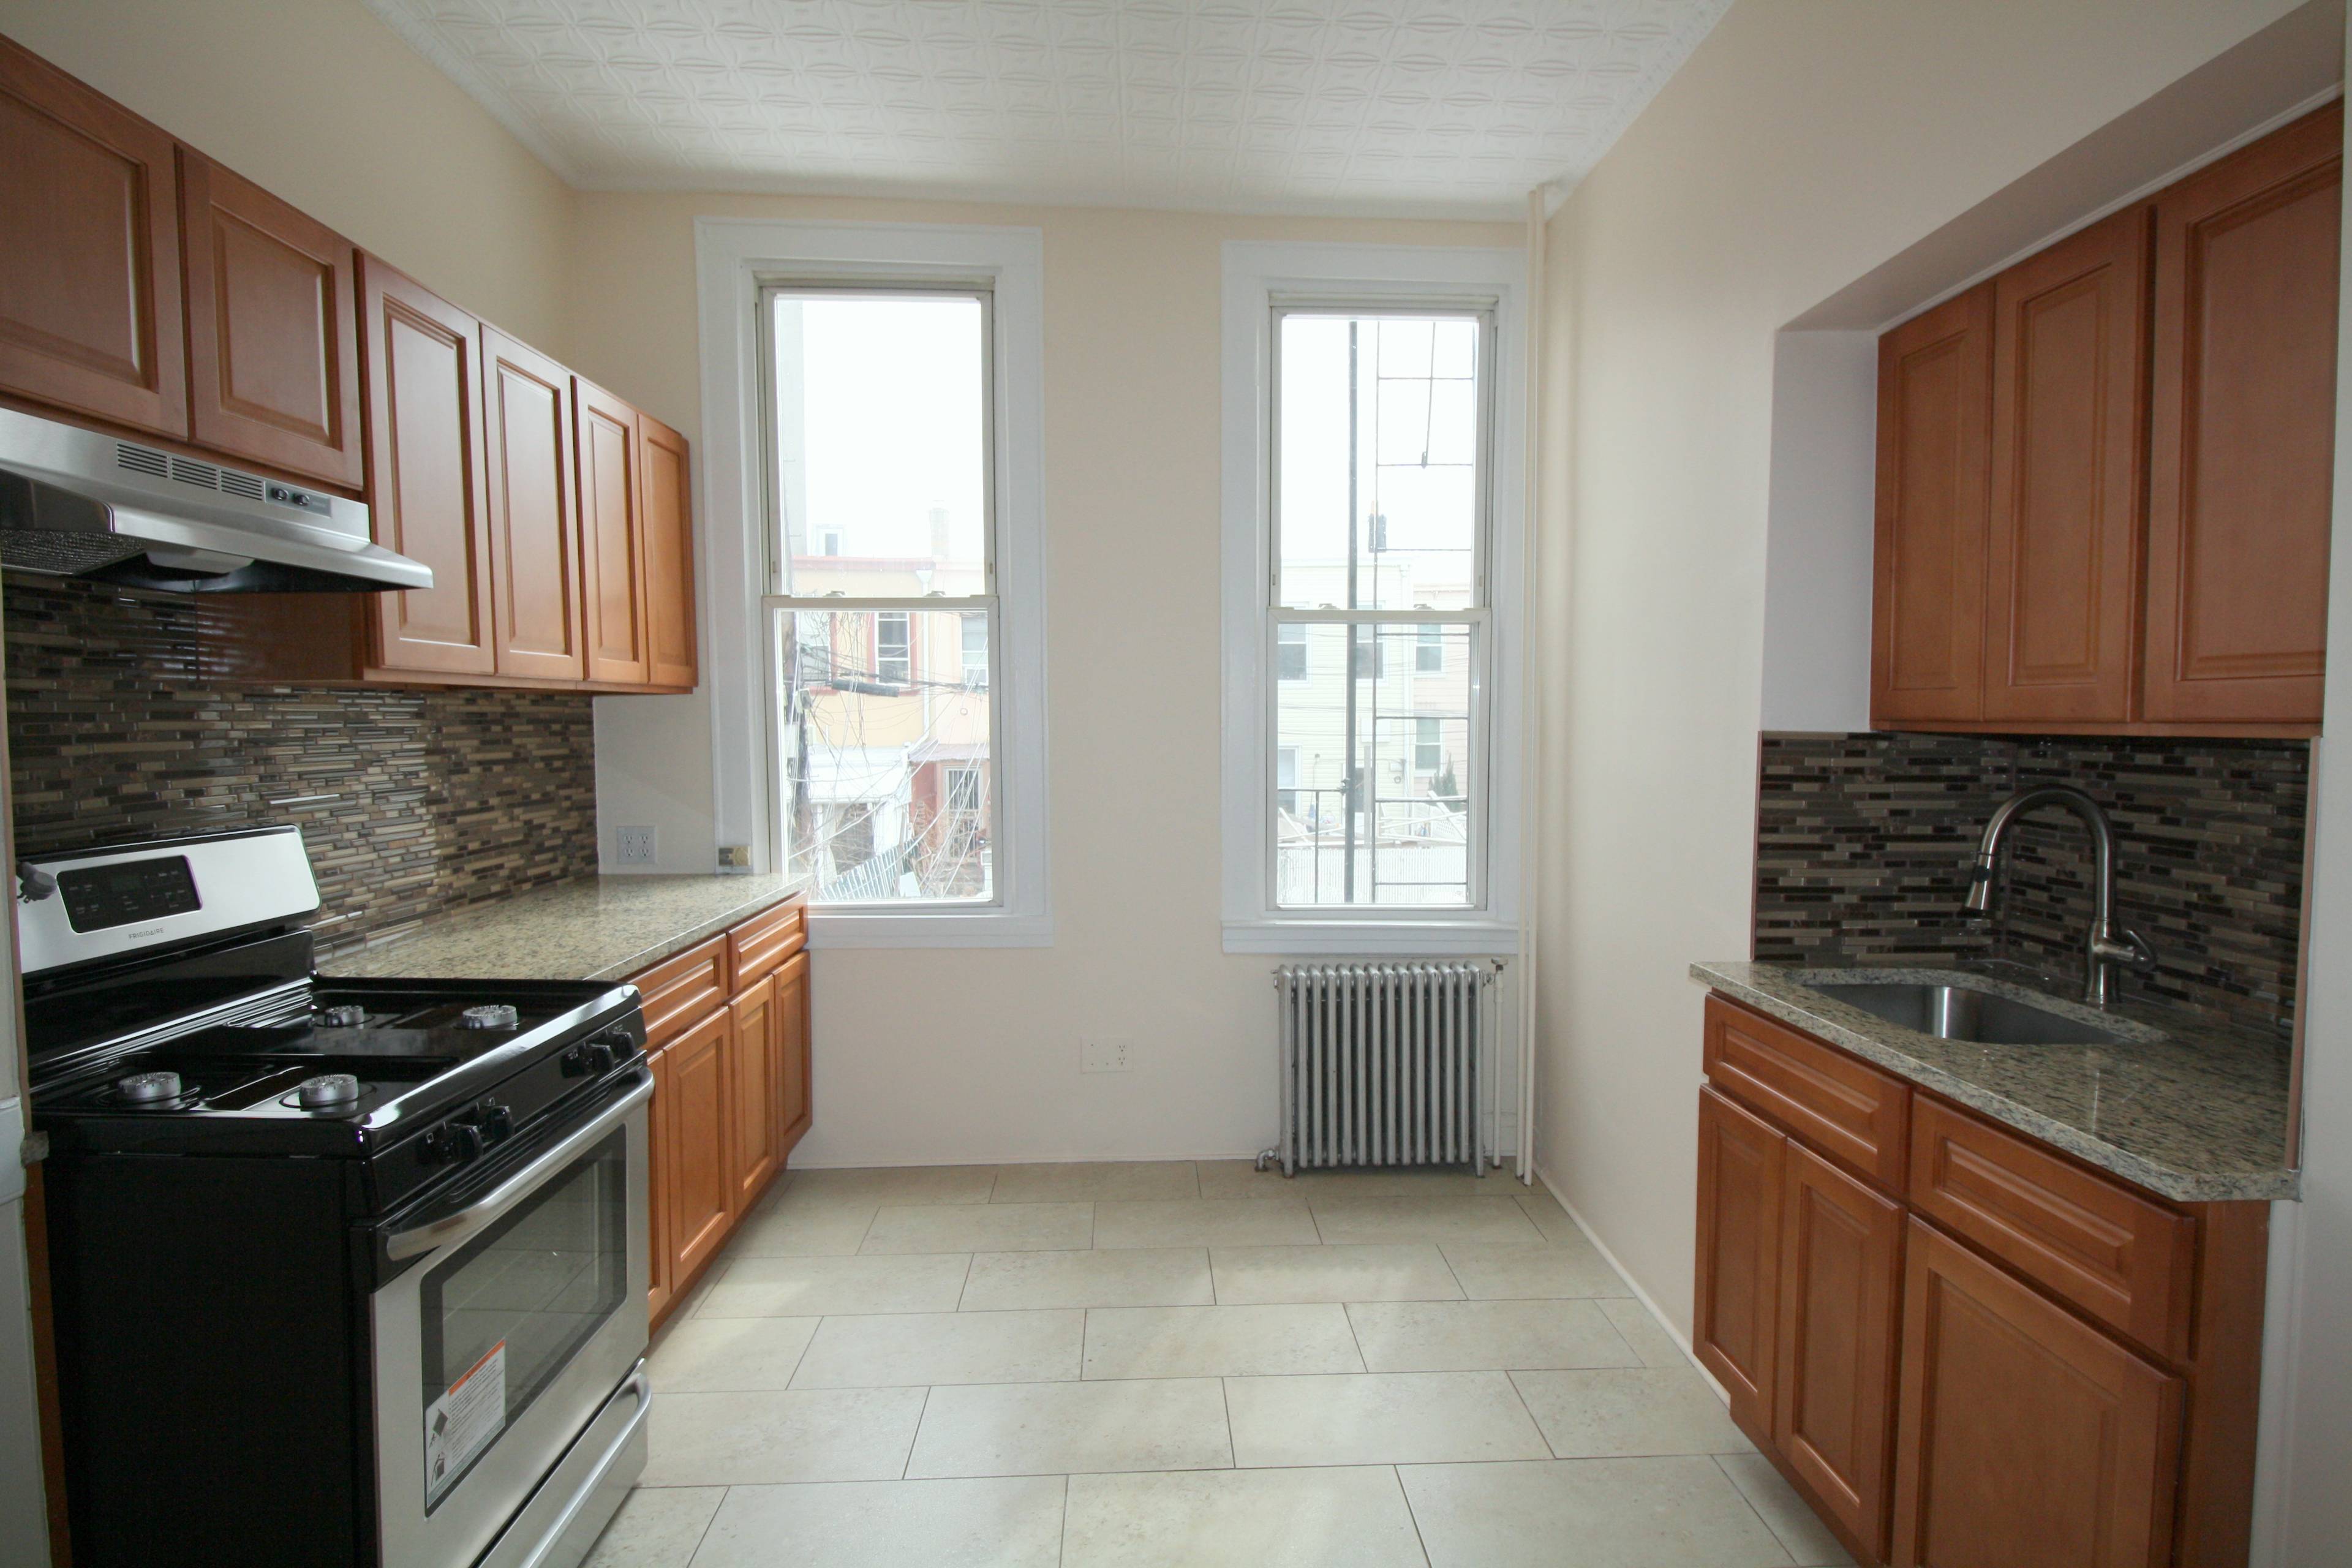 Brand Newly Renovated 1 Bedroom Apartment with Home Office in WIlliamsburg, 2 blocks to the L Train!